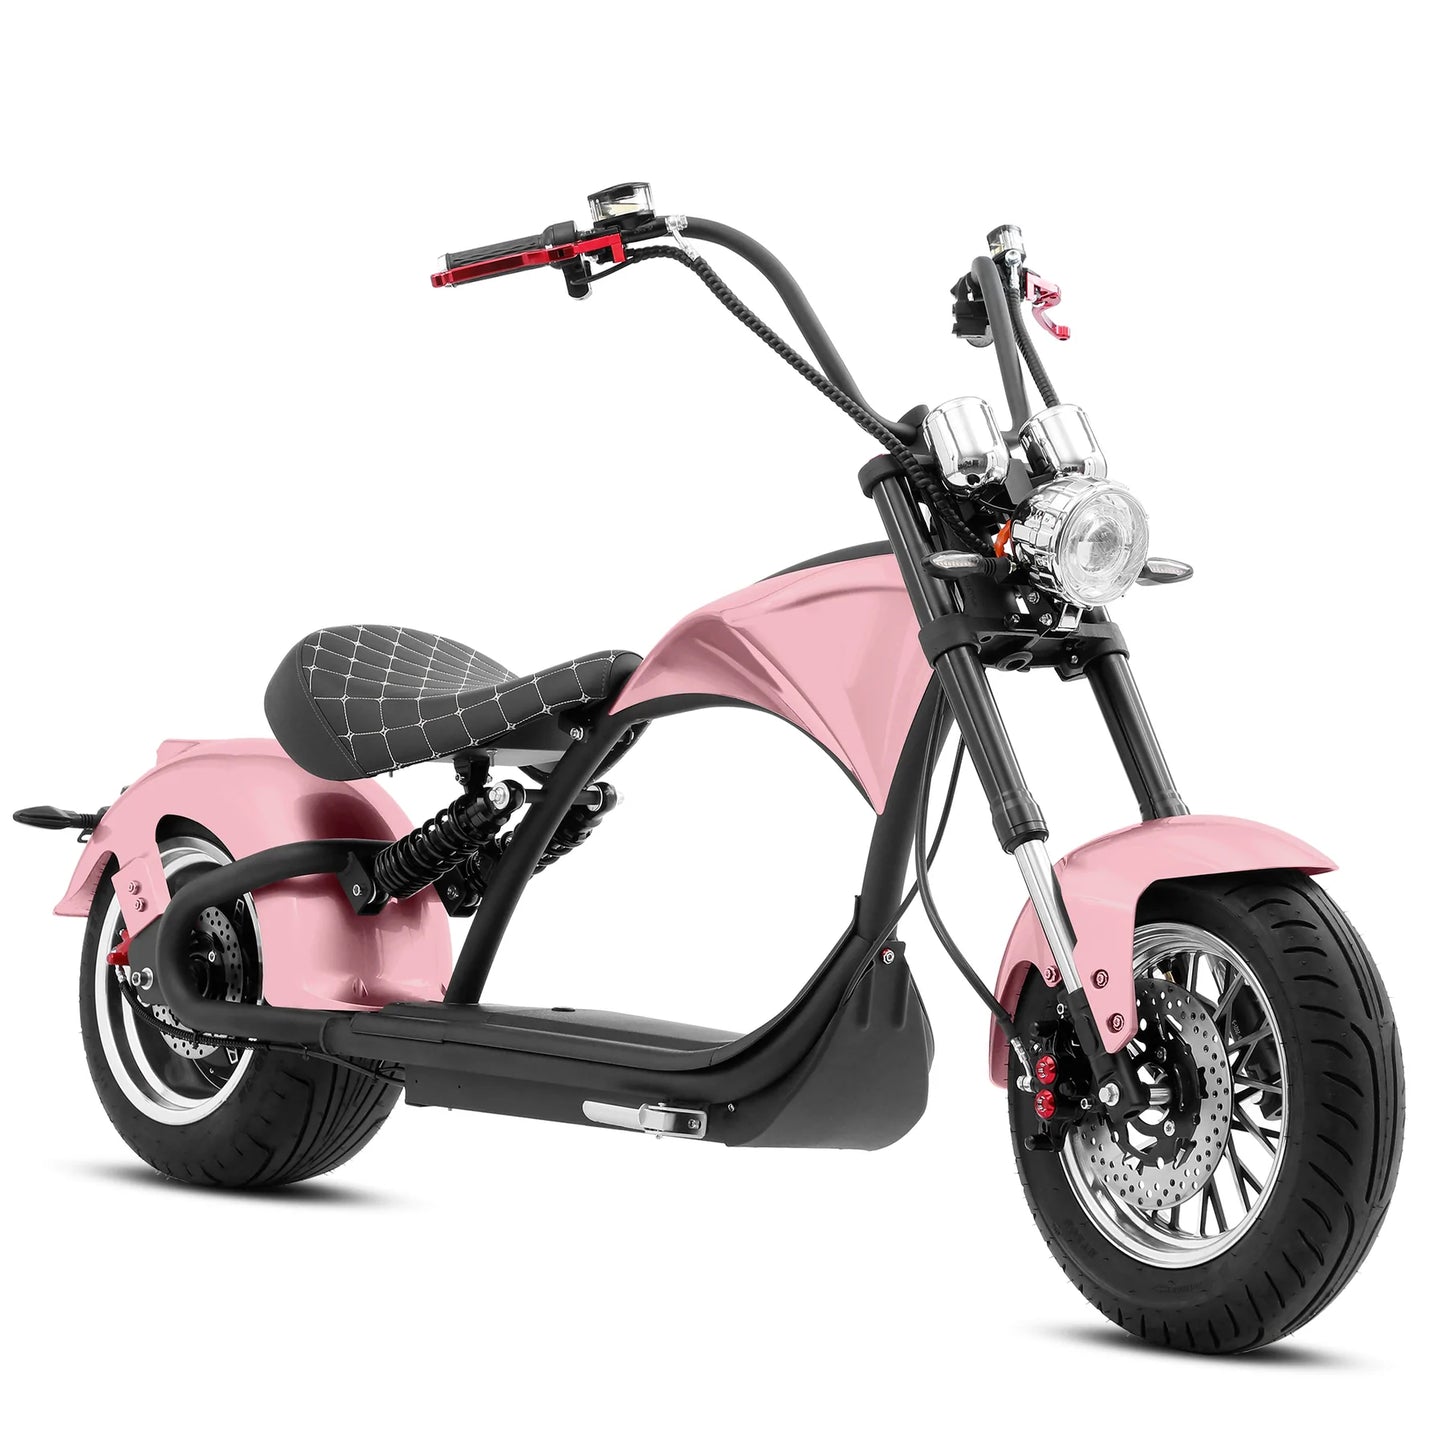 Eahora Emars M1P Electric Scooter - Pink | Bike Lover USA